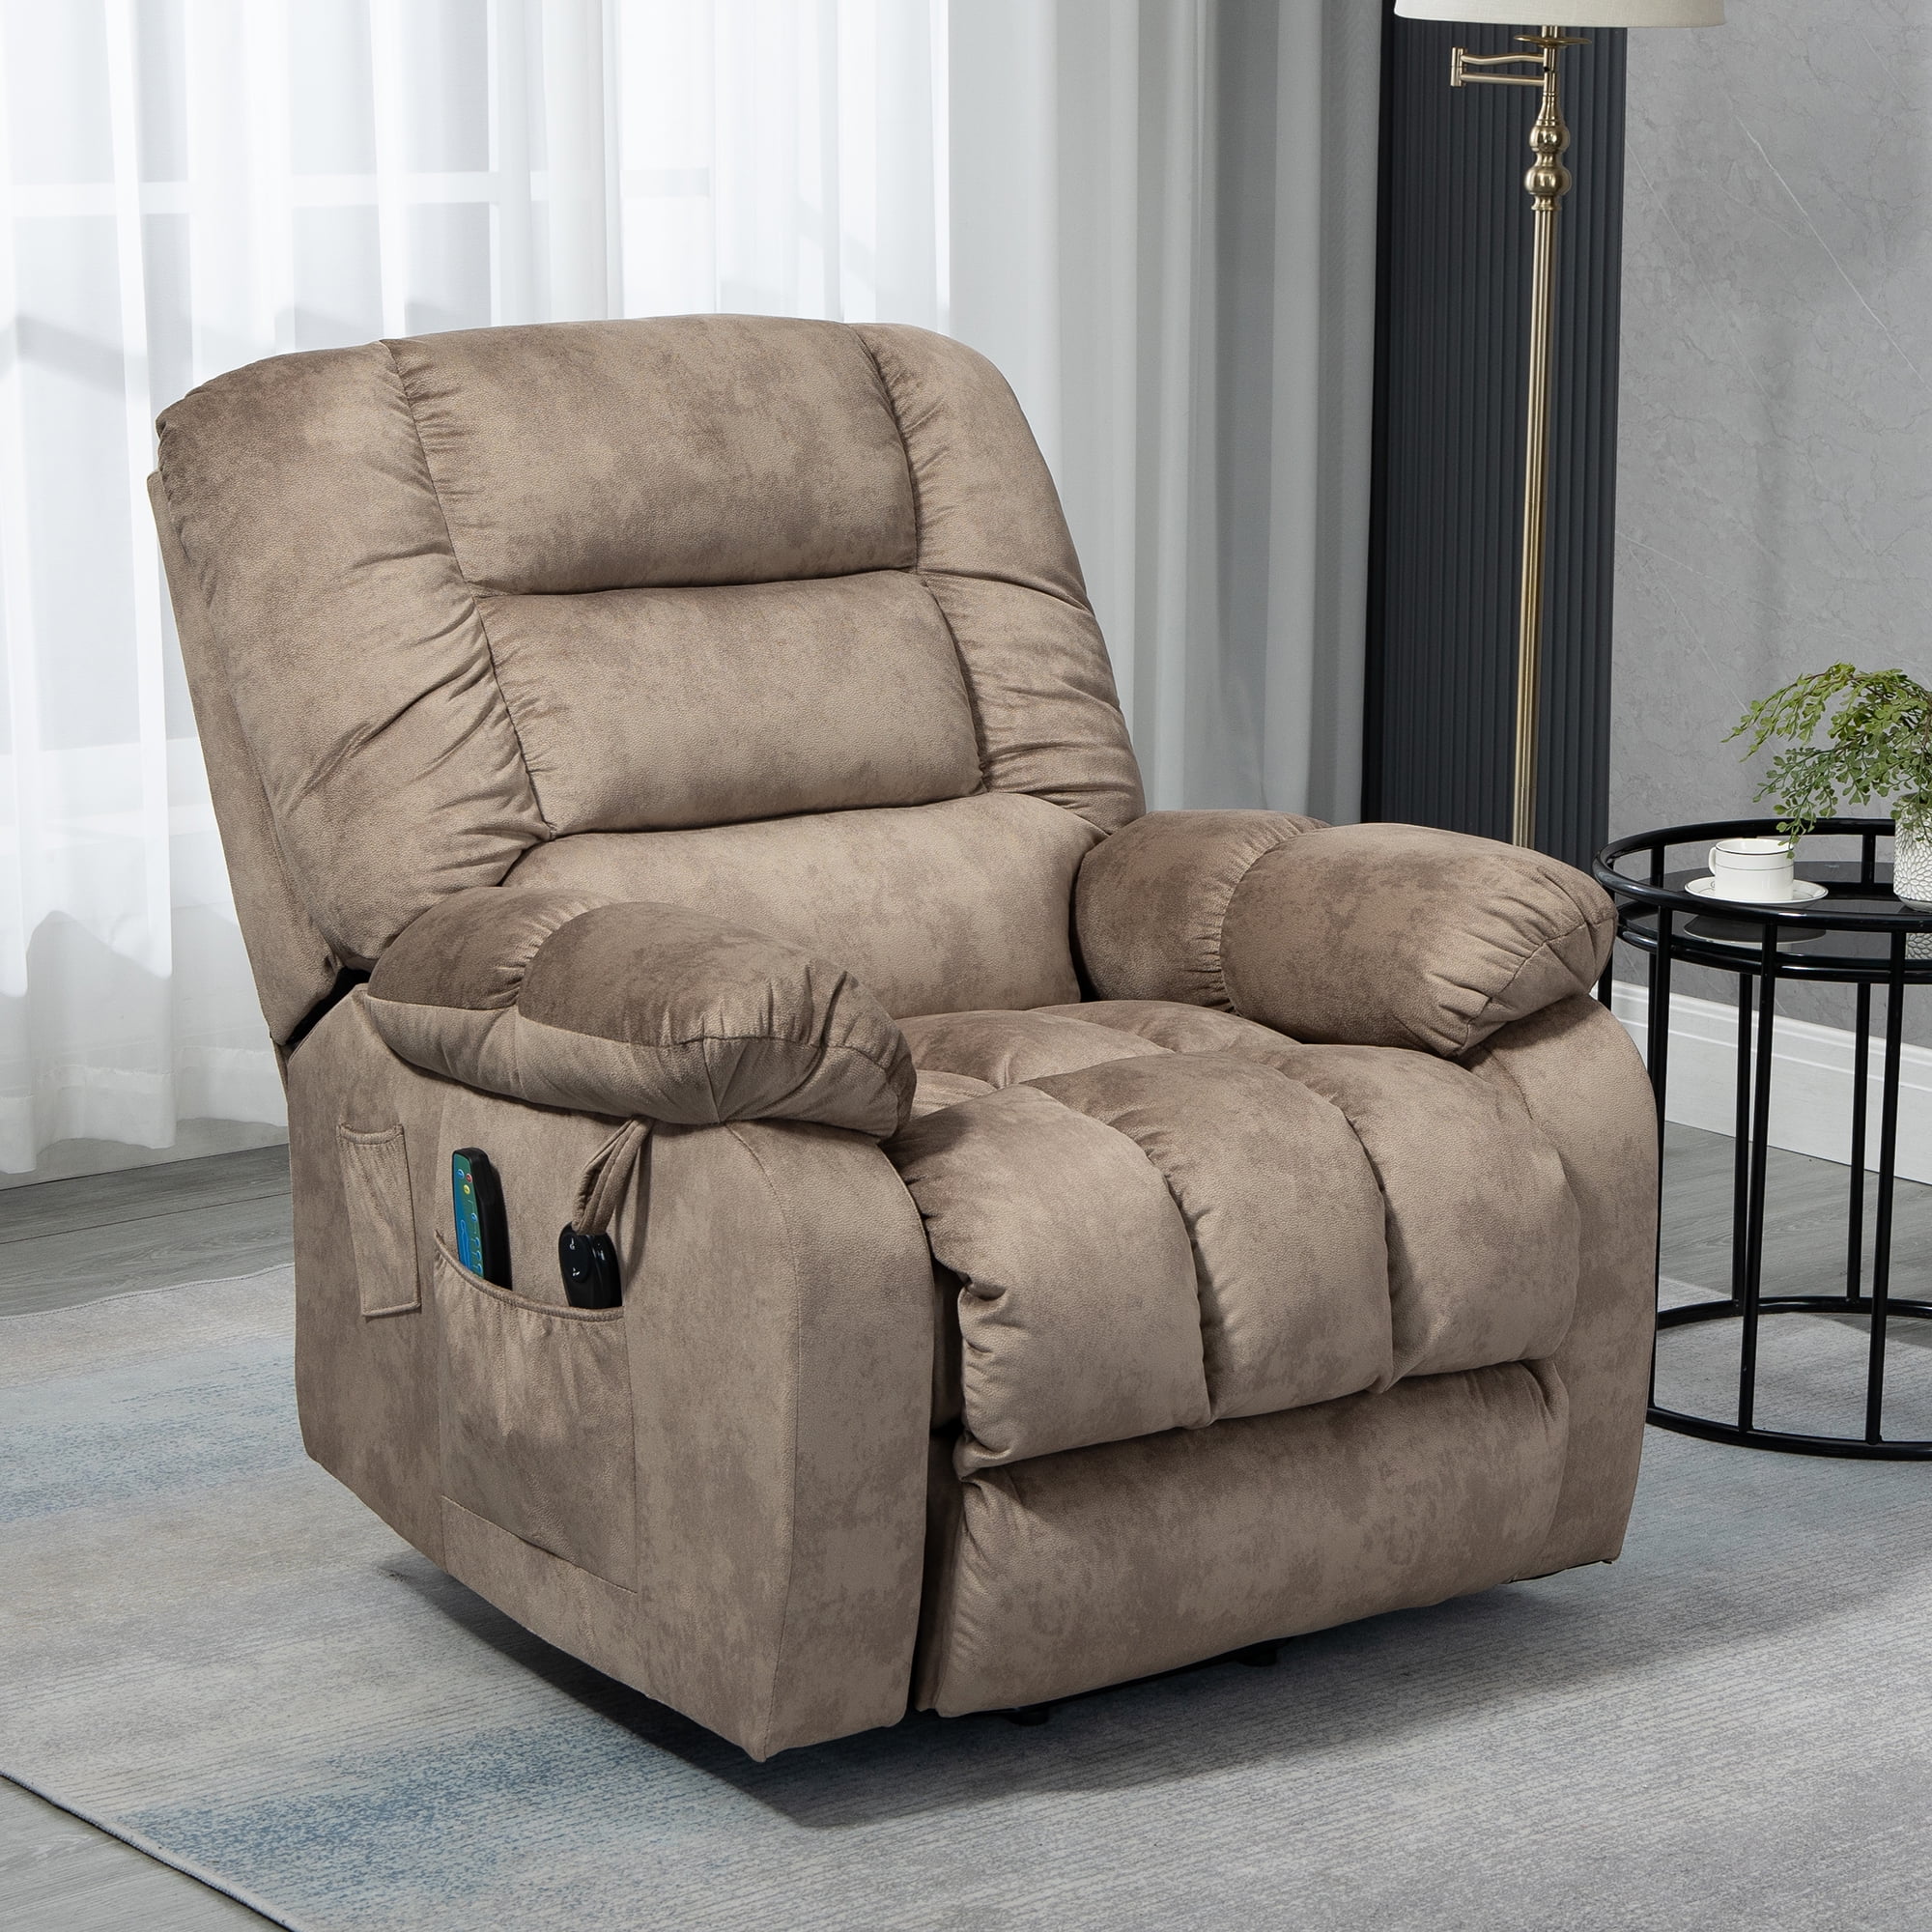 uhomepro Large Massage Recliner Chair, PU Leather Electric Heated Power  Lift Recliner Chairs for Adults Oversize, Recliner Sofa 400 lb Capacity  with 5